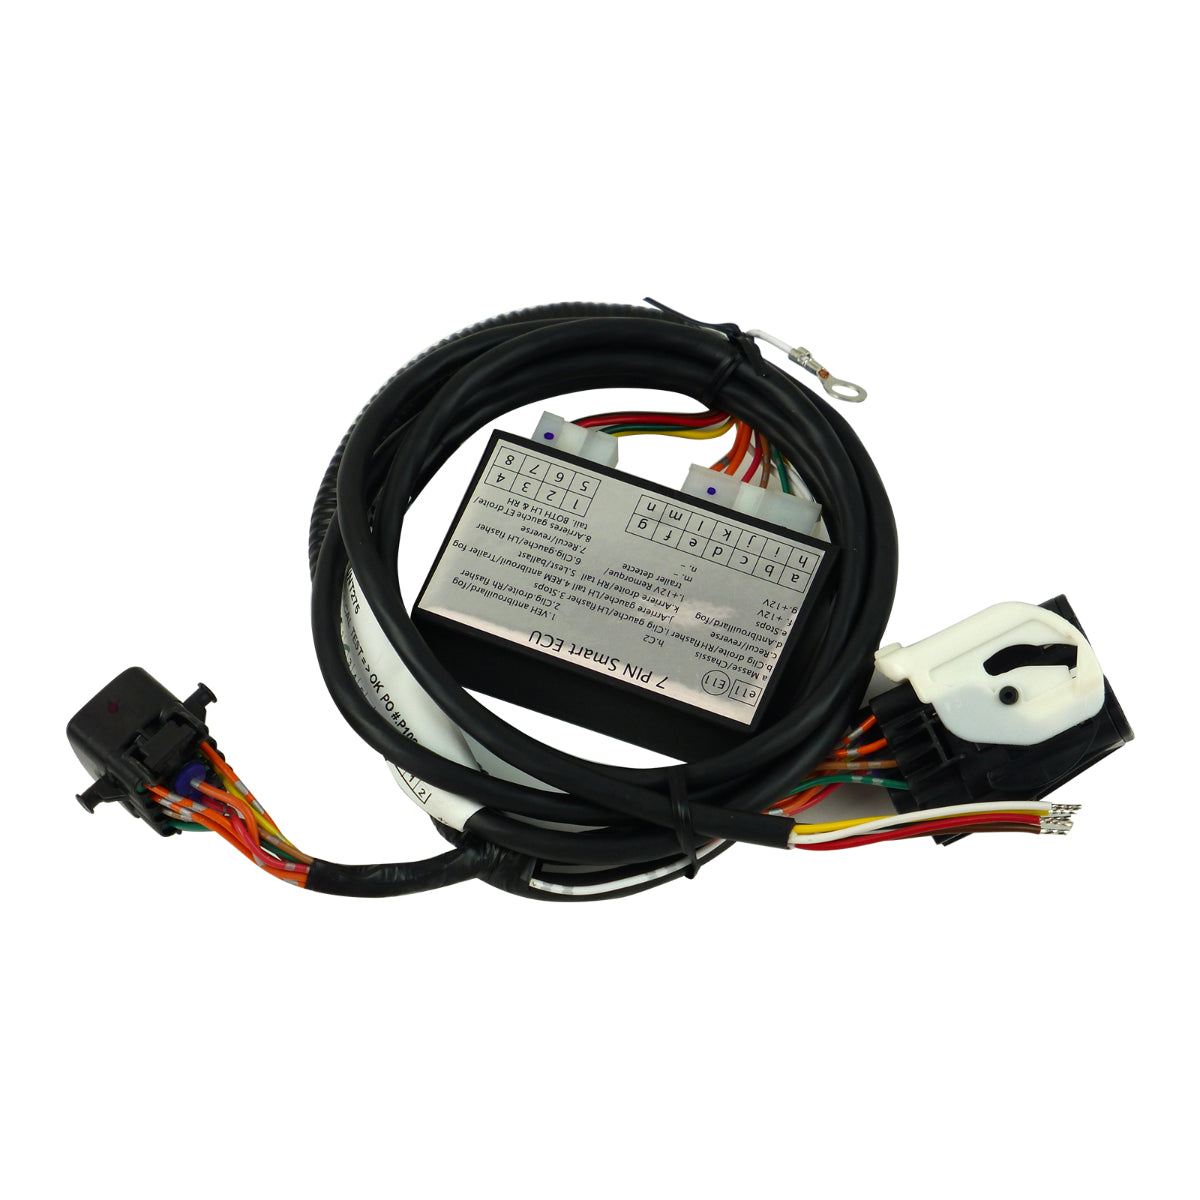 TAG Pulse Towbar Wiring Direct Fit Ecu for Holden Commodore (01/2007 - on), HSV Maloo (10/2007 - 05/2013) - OZI4X4 PTY LTD